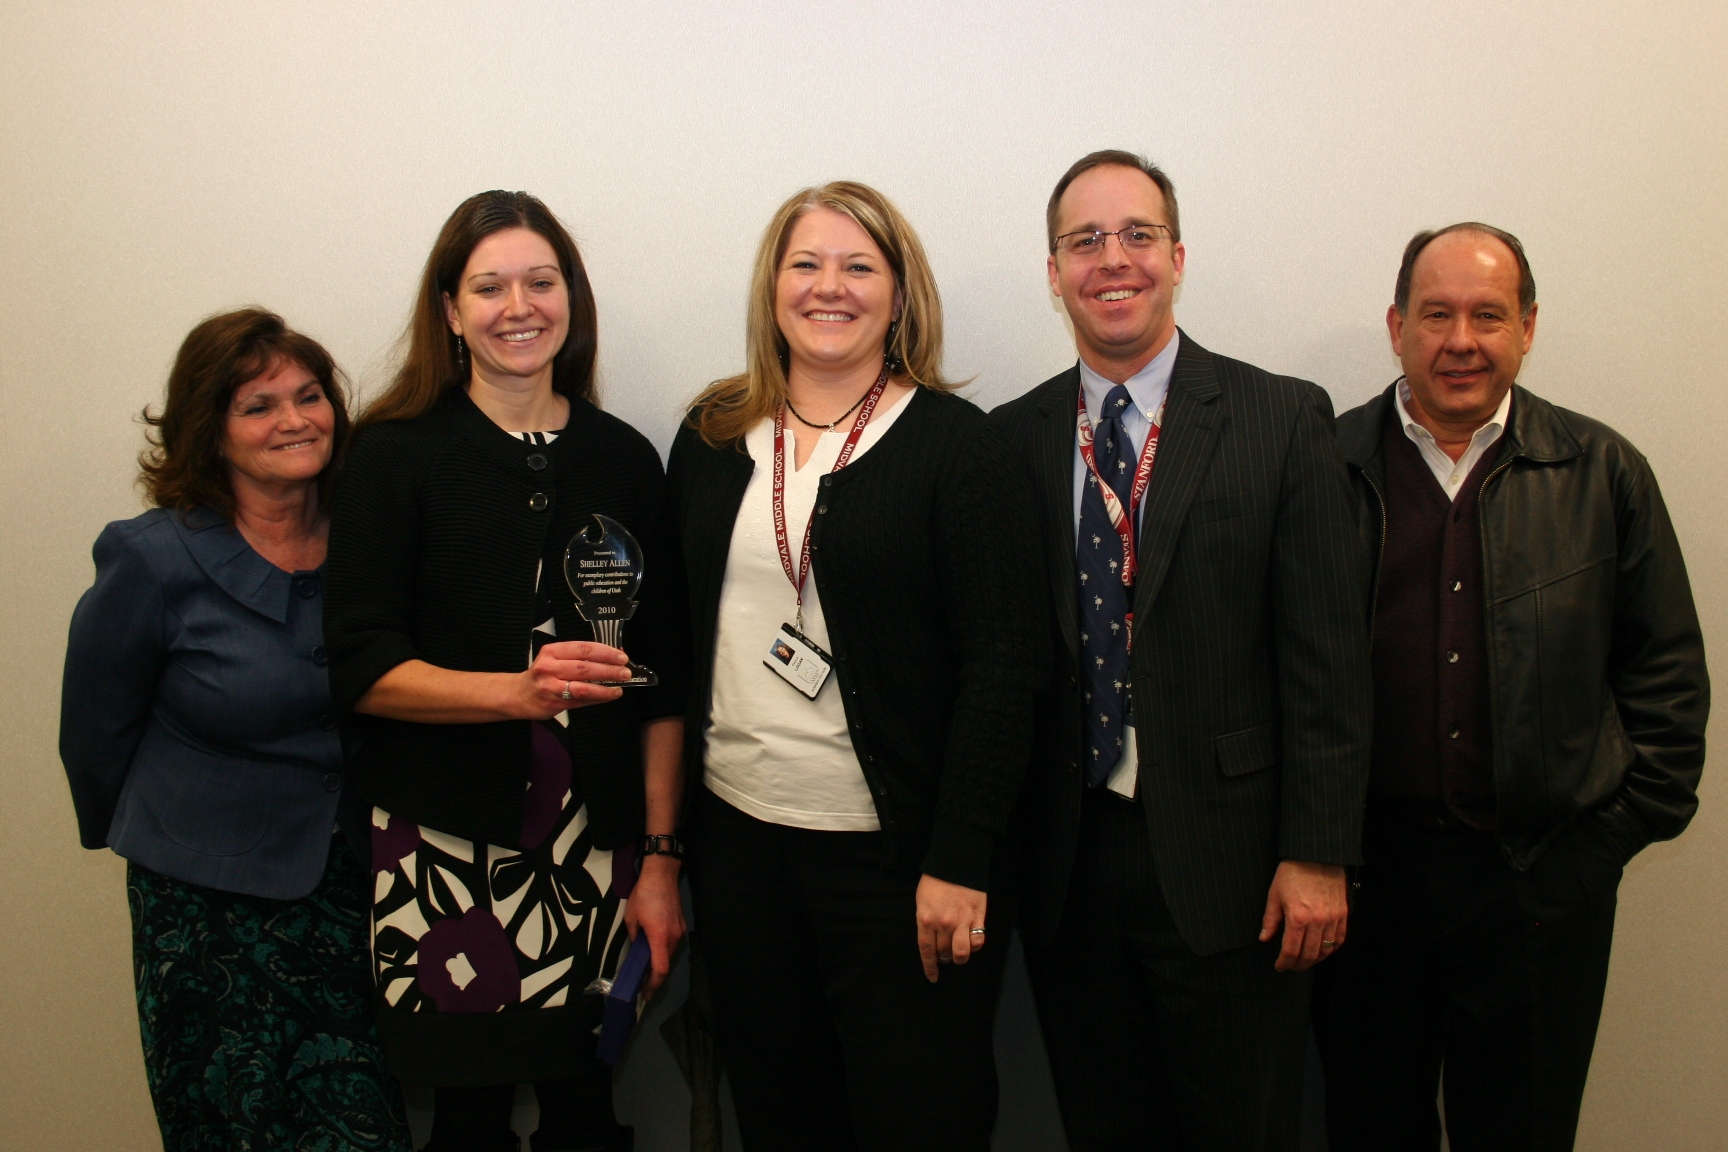 Shelley Allen, second from right, shows her award. She is pictured with her mother, xx, Midvale Middle Principal Paula Logan, Canyons Superintendent David Doty, and Canyons Board of Education Member Mont Millerberg.